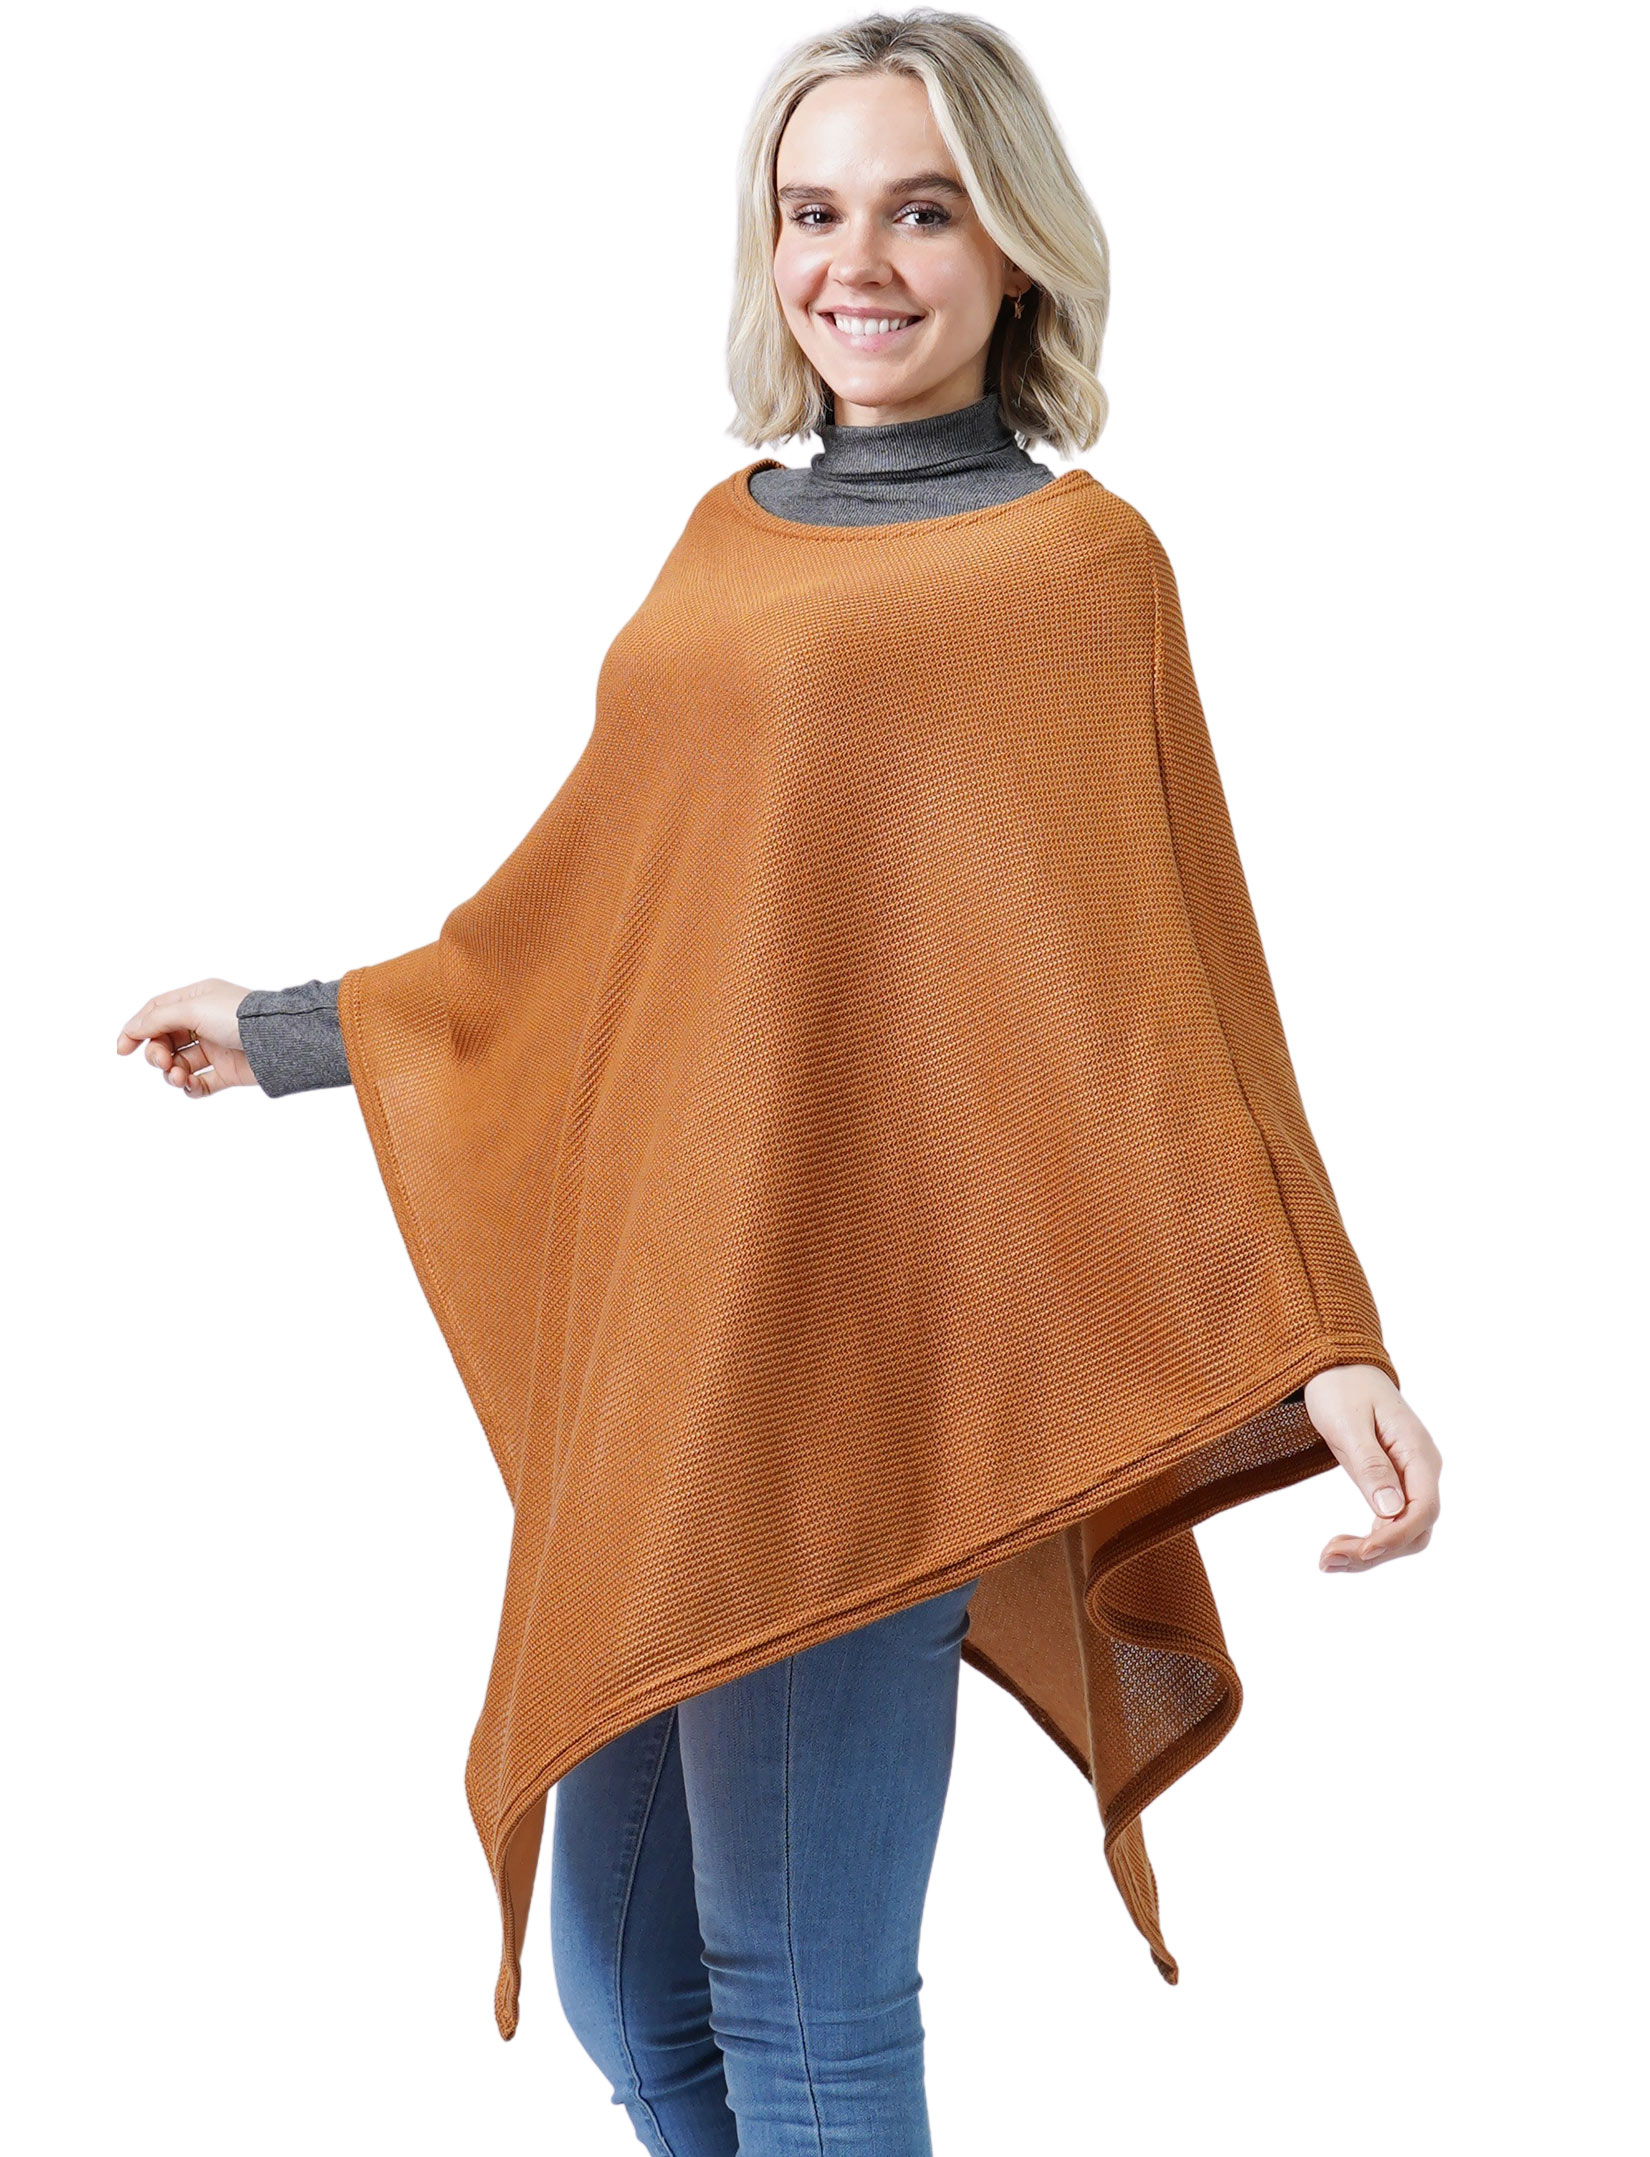 10336 - Textured Weave Jersey Poncho